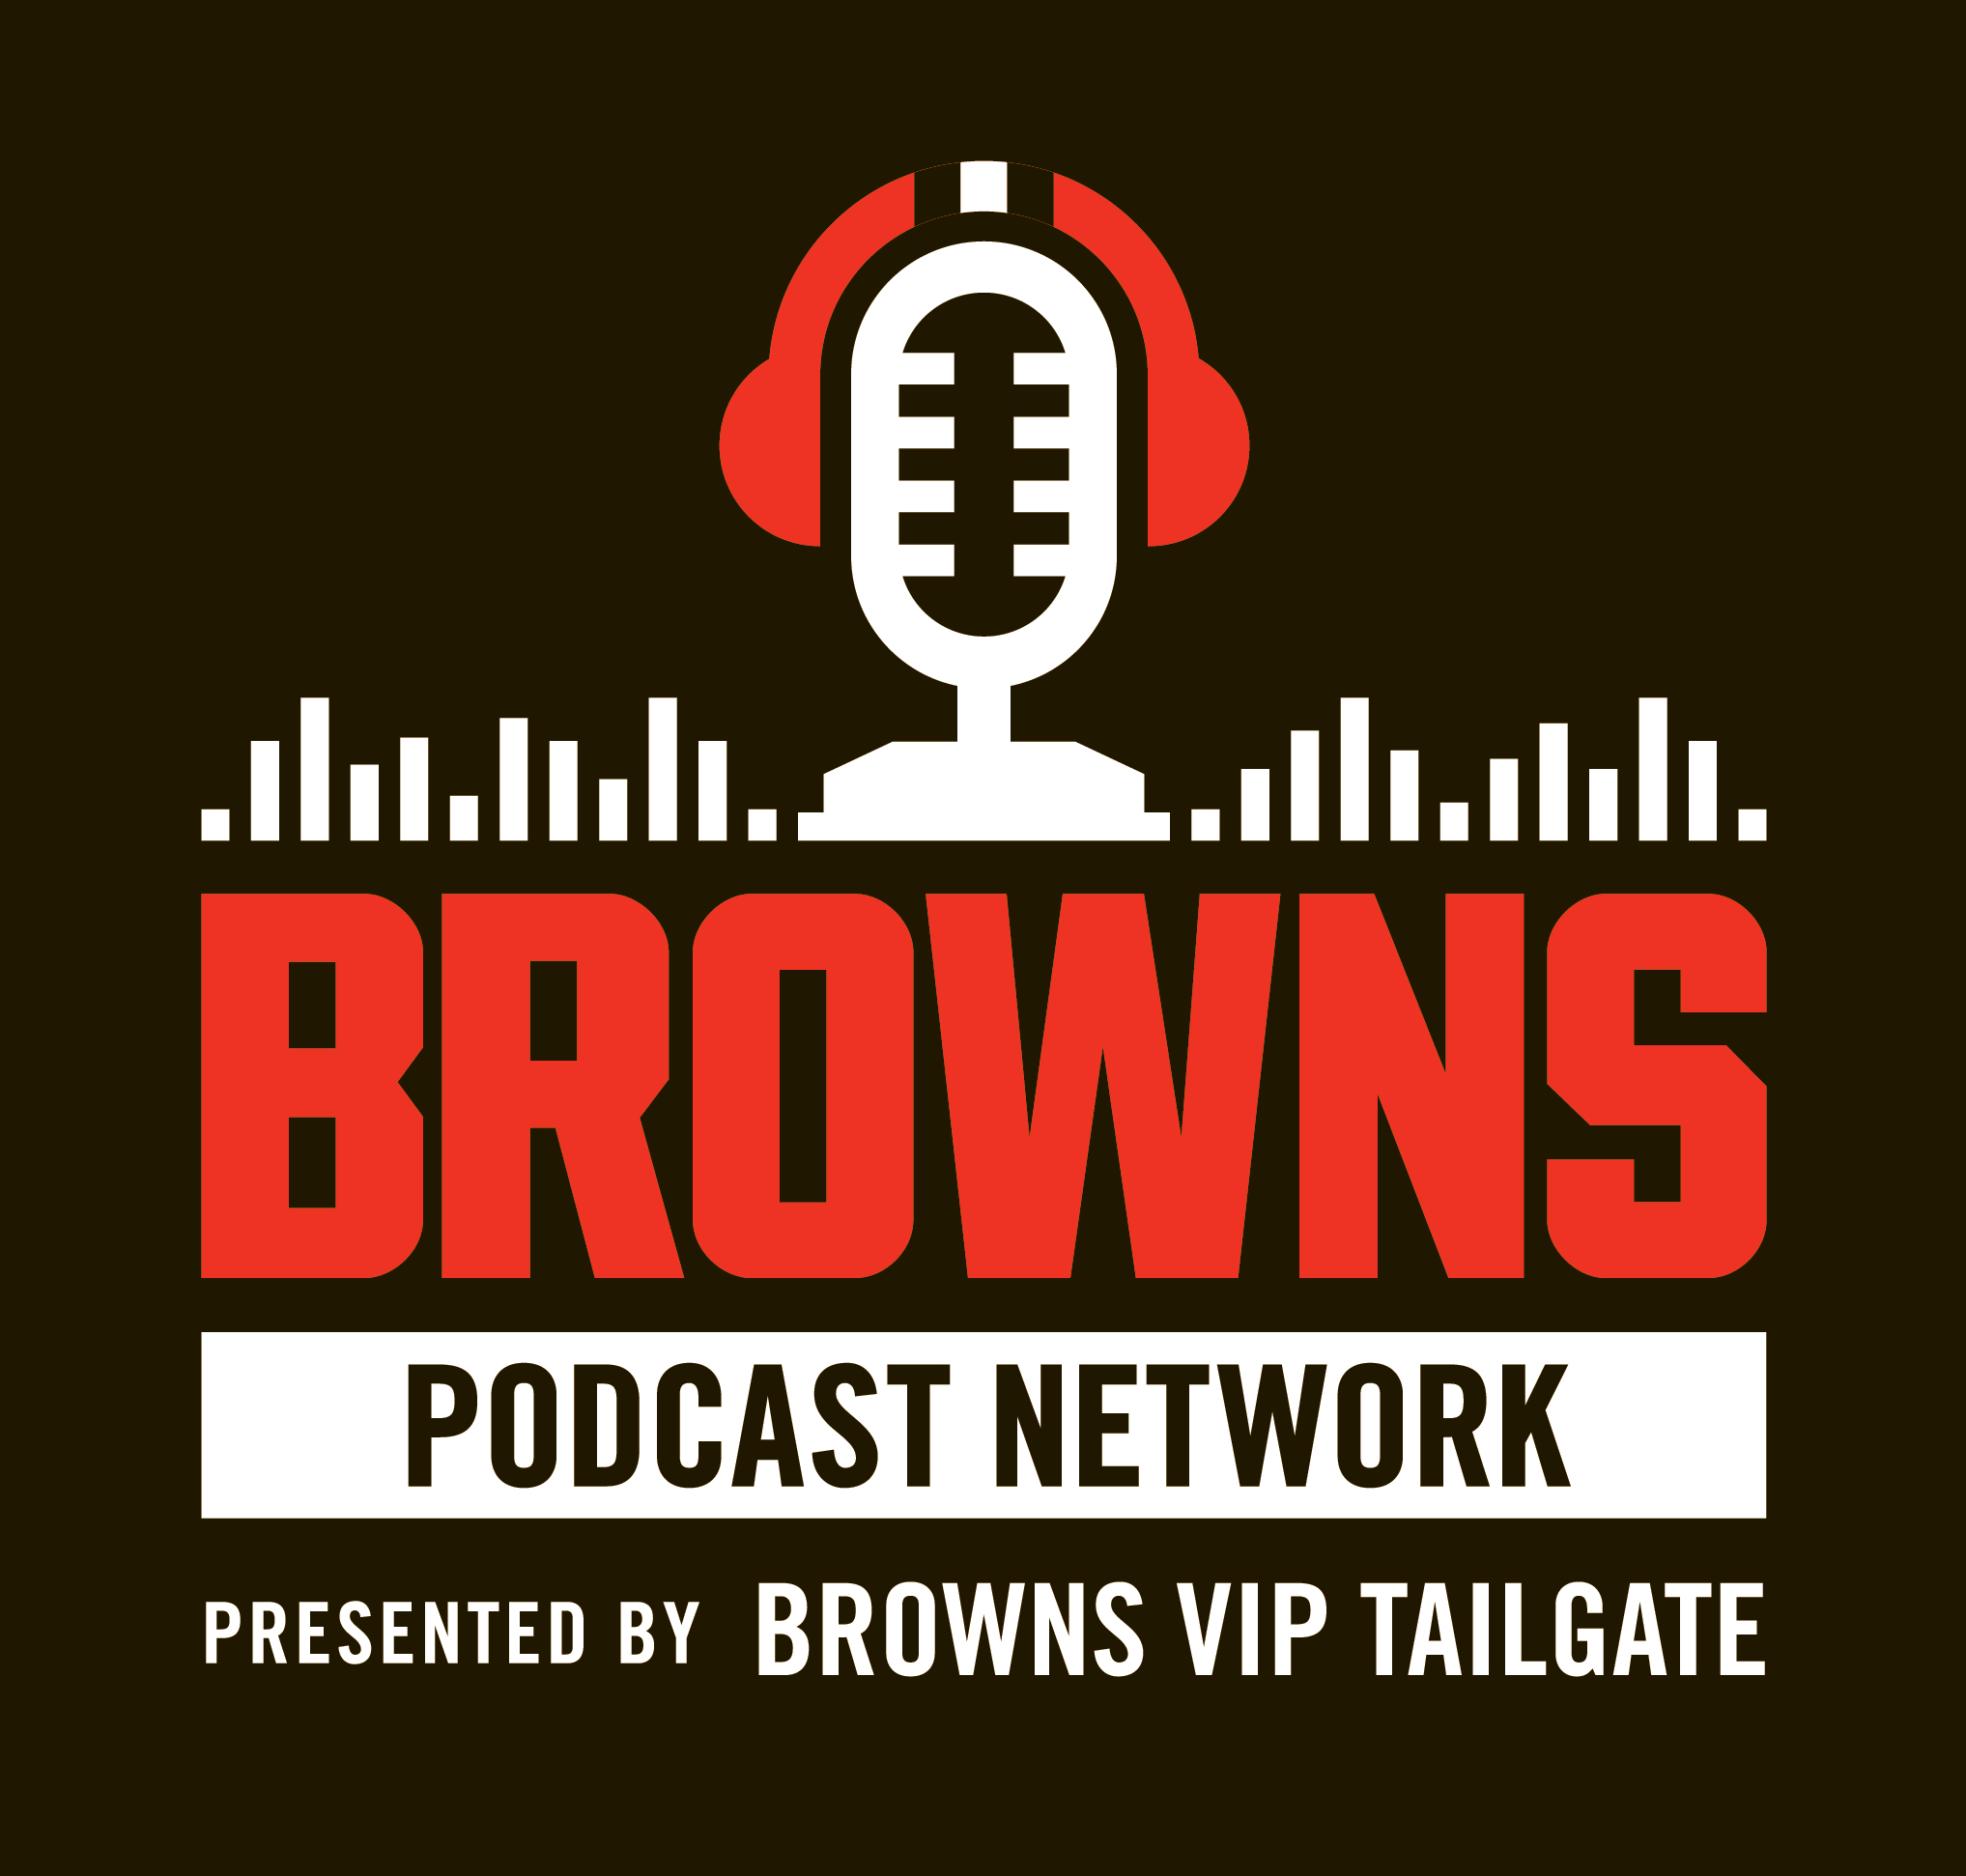 Cleveland Browns Daily – Browns LB Jacob Phillips joins the show